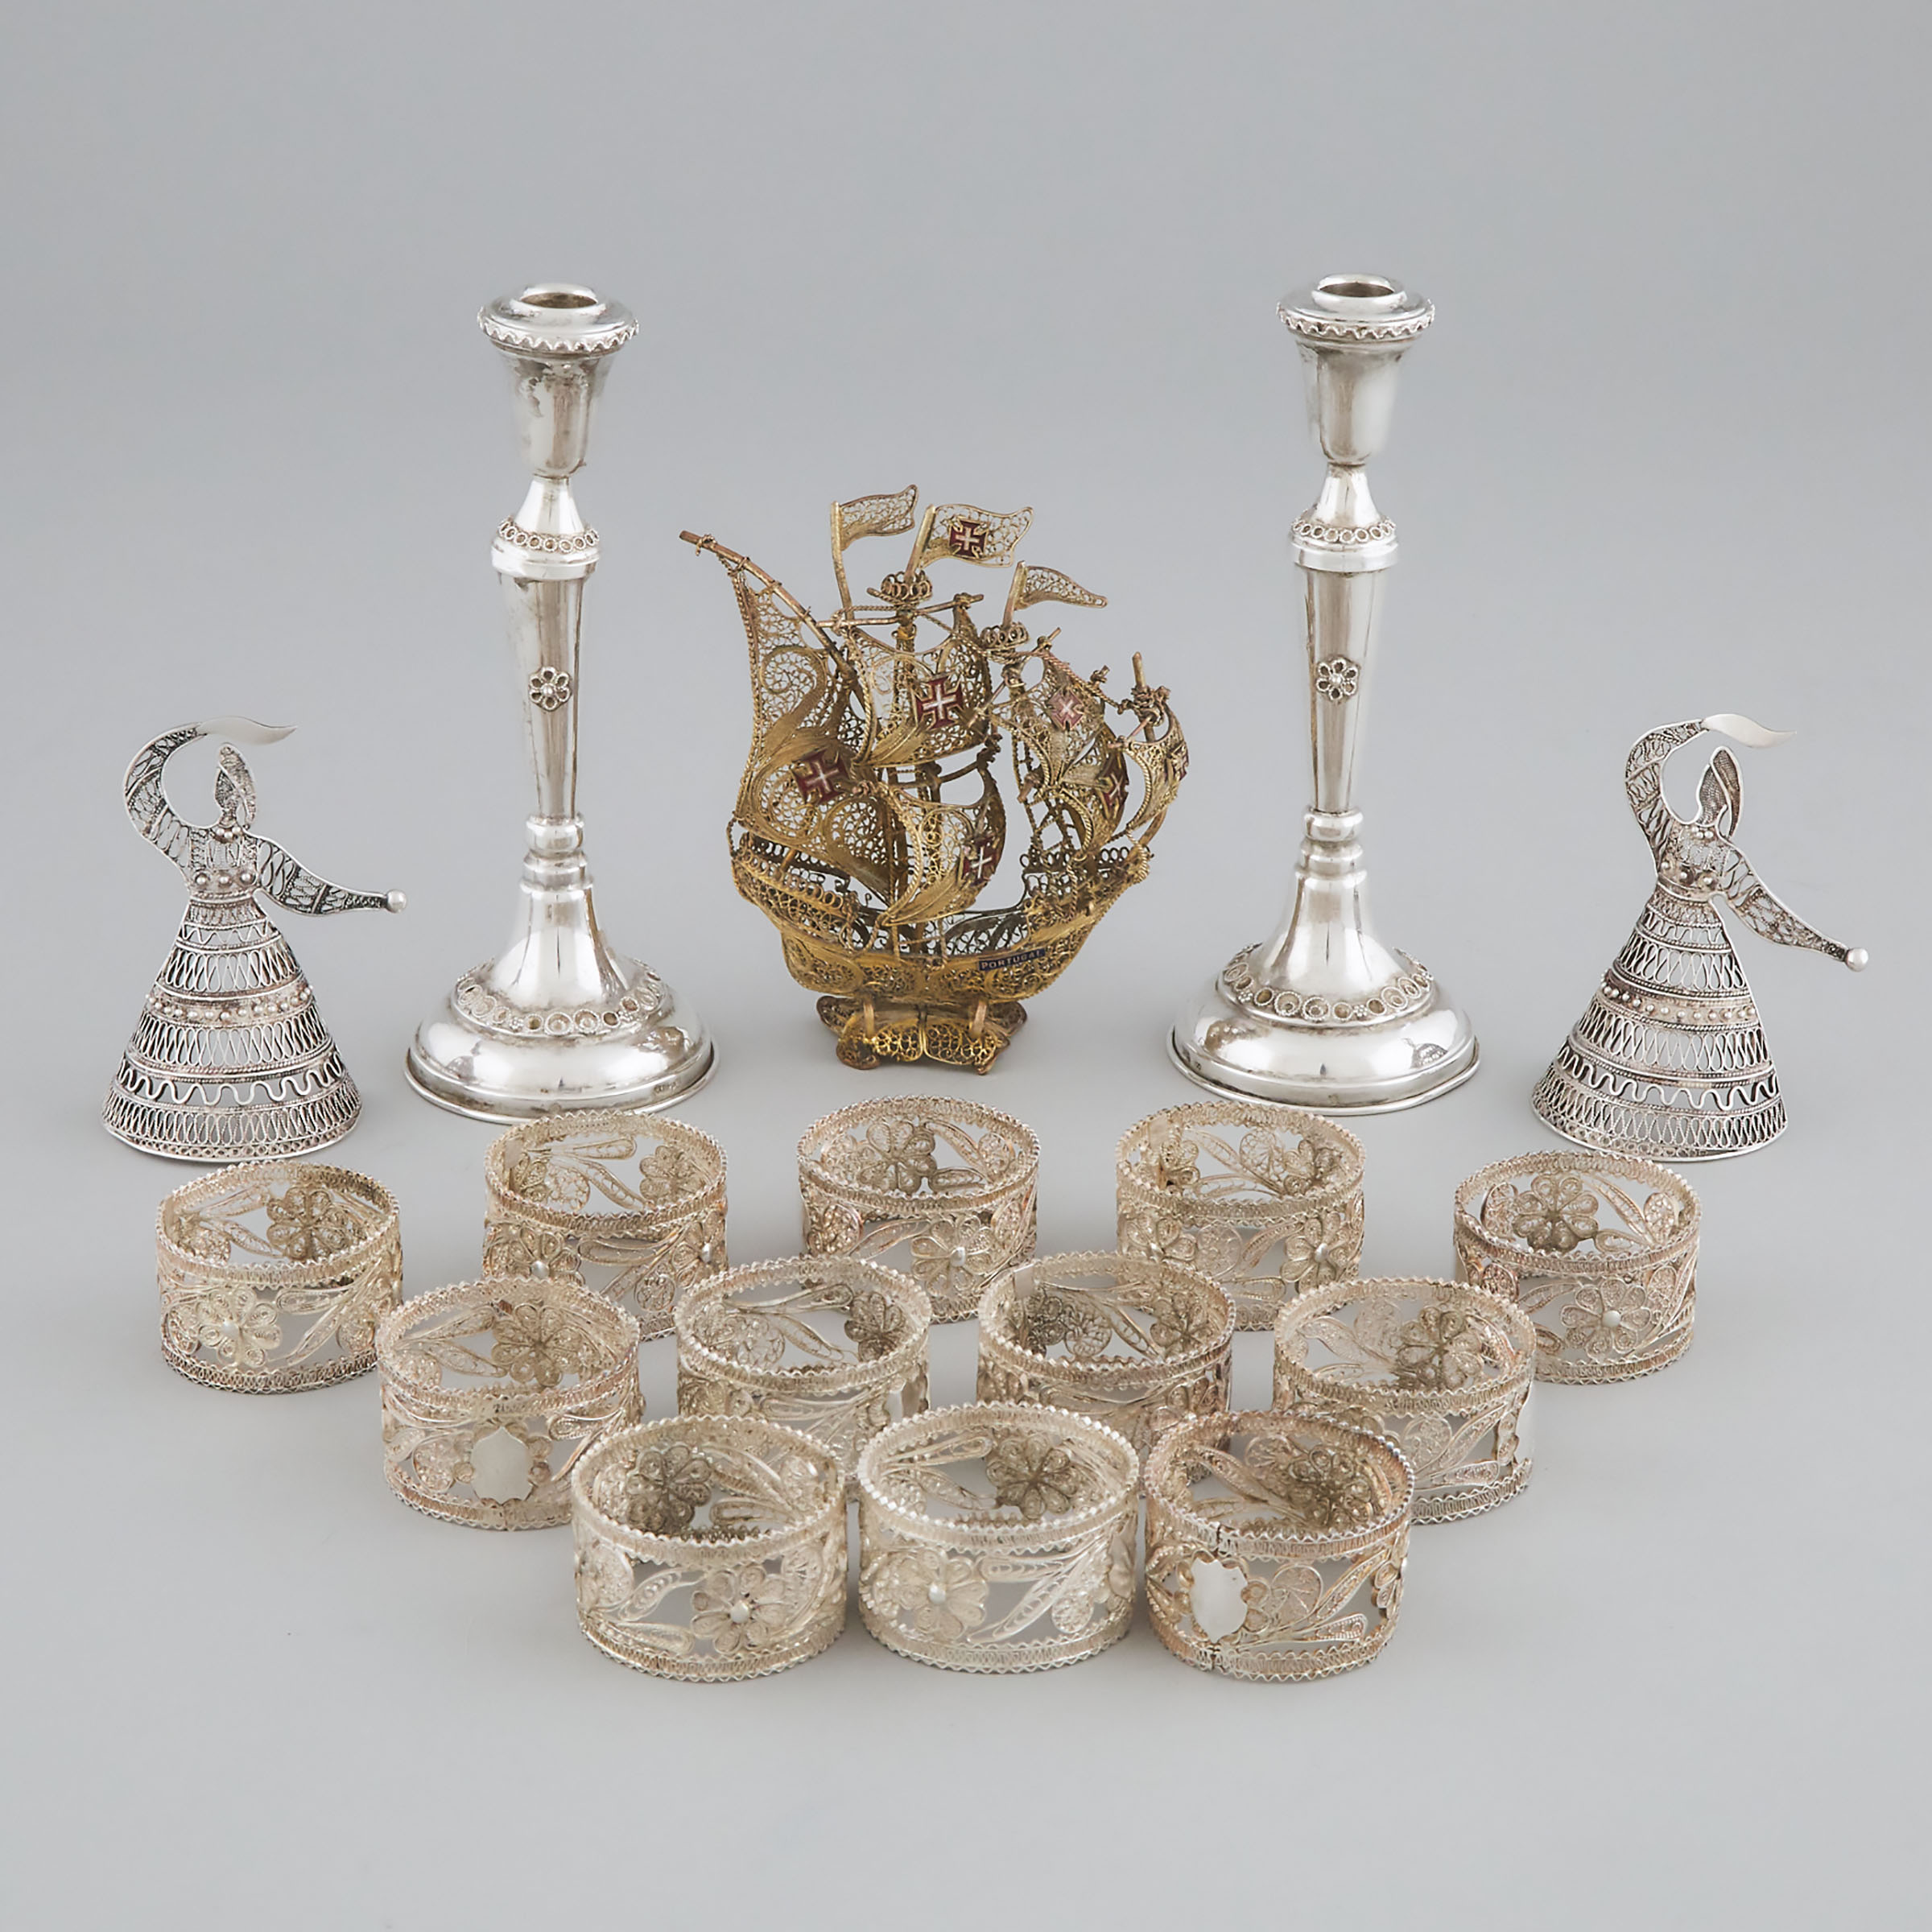 Pair of Silver Filigree Candlesticks, Twelve Napkin Rings, Pair of Figures and a Small Nef, 20th century